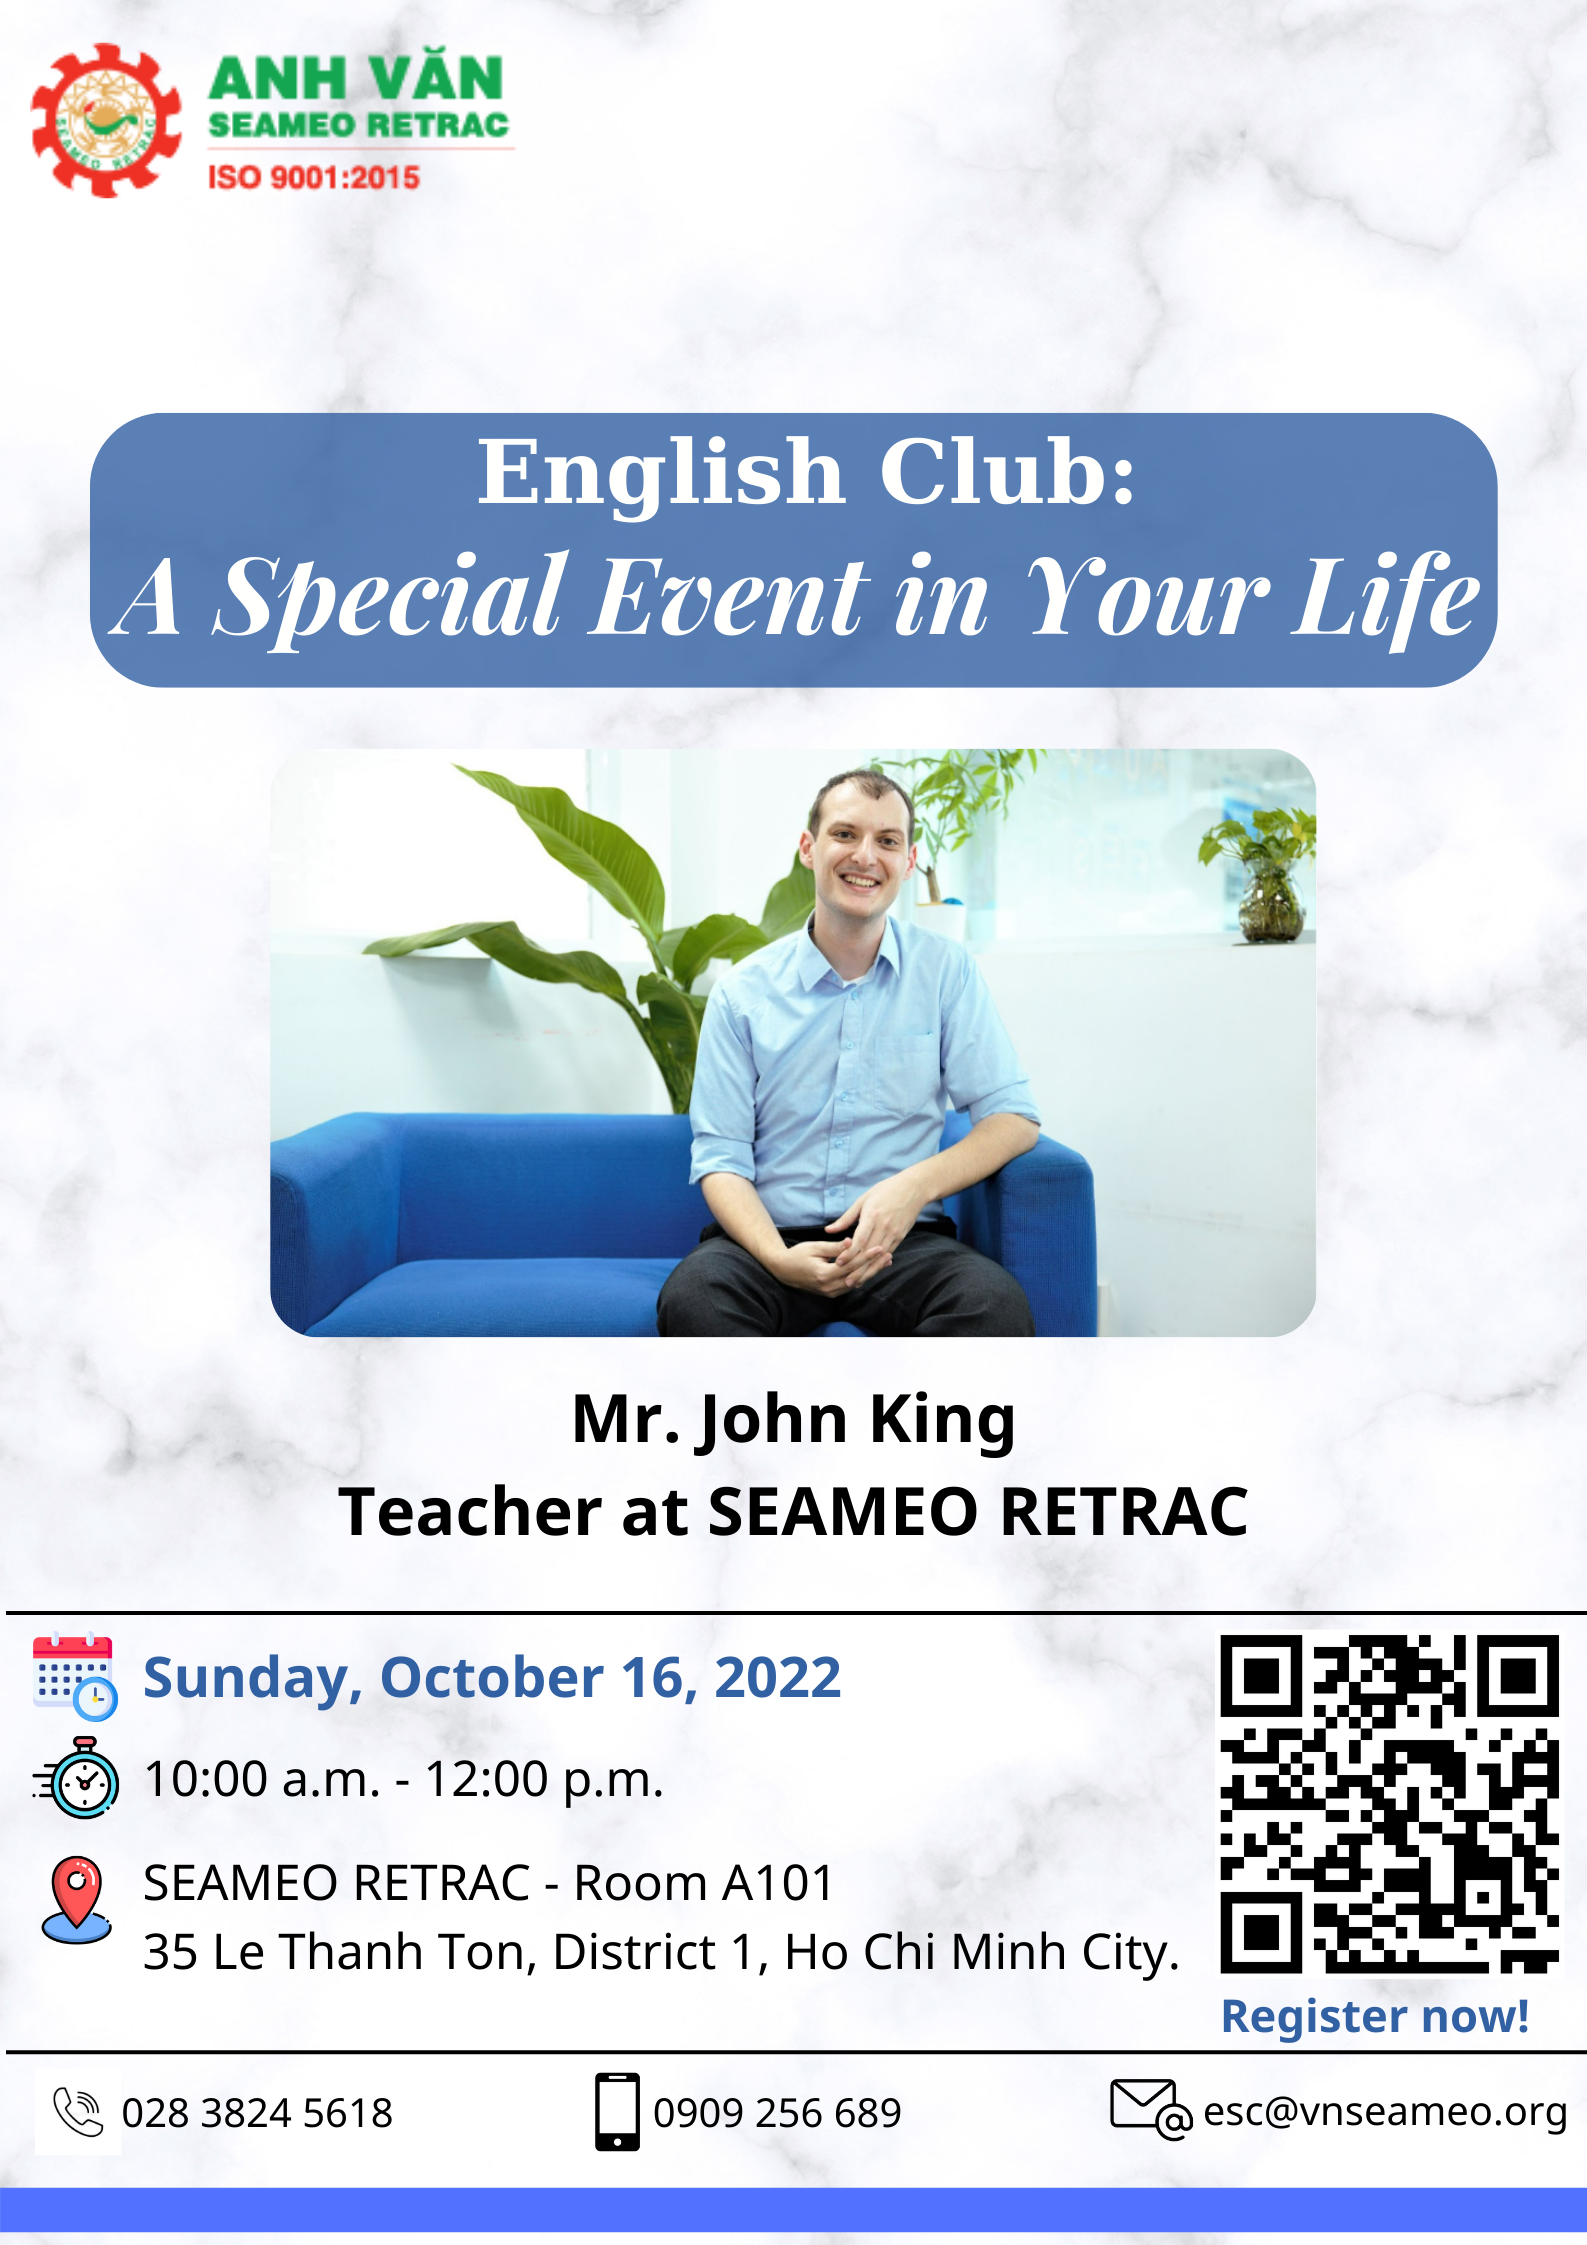 English club titled “A SPECIAL EVENT IN YOUR LIFE”